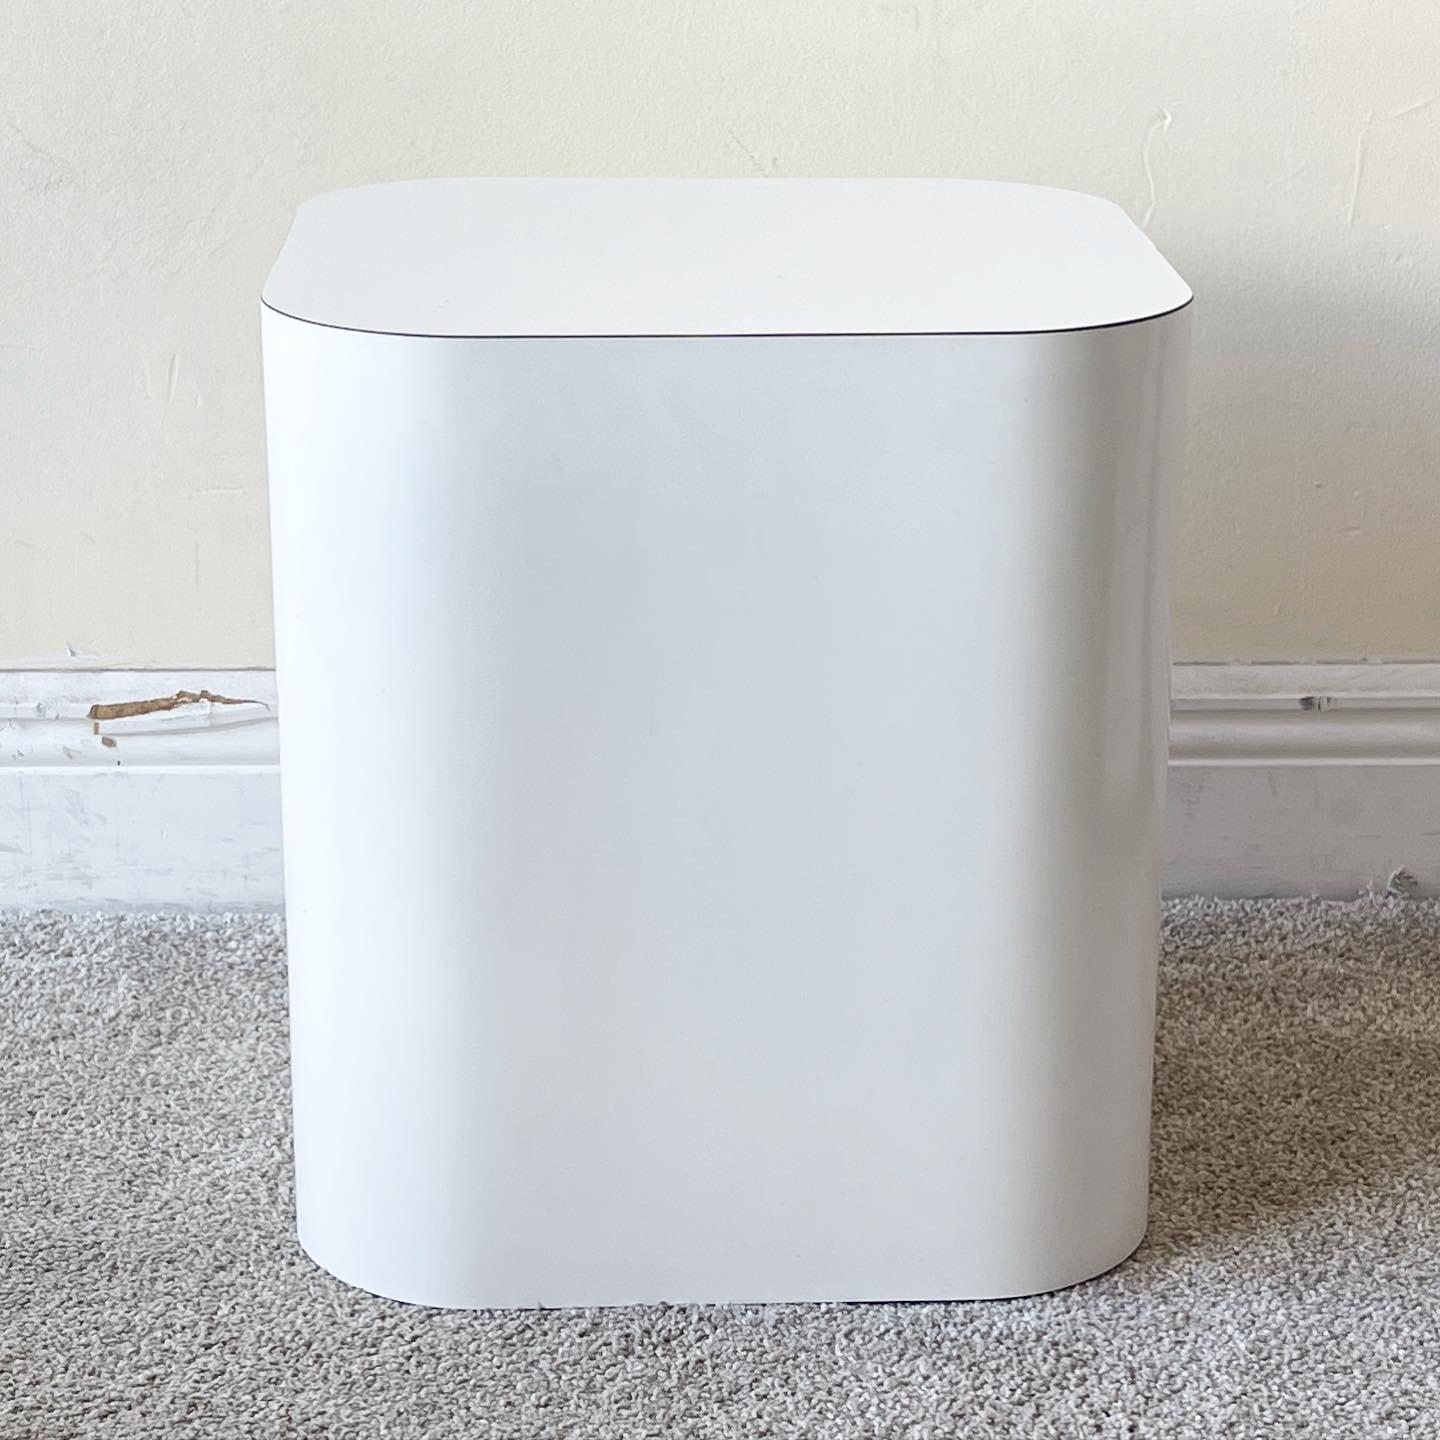 Post-Modern Postmodern White Lacquer Laminate Vanity Dresser with Mirror and Stool